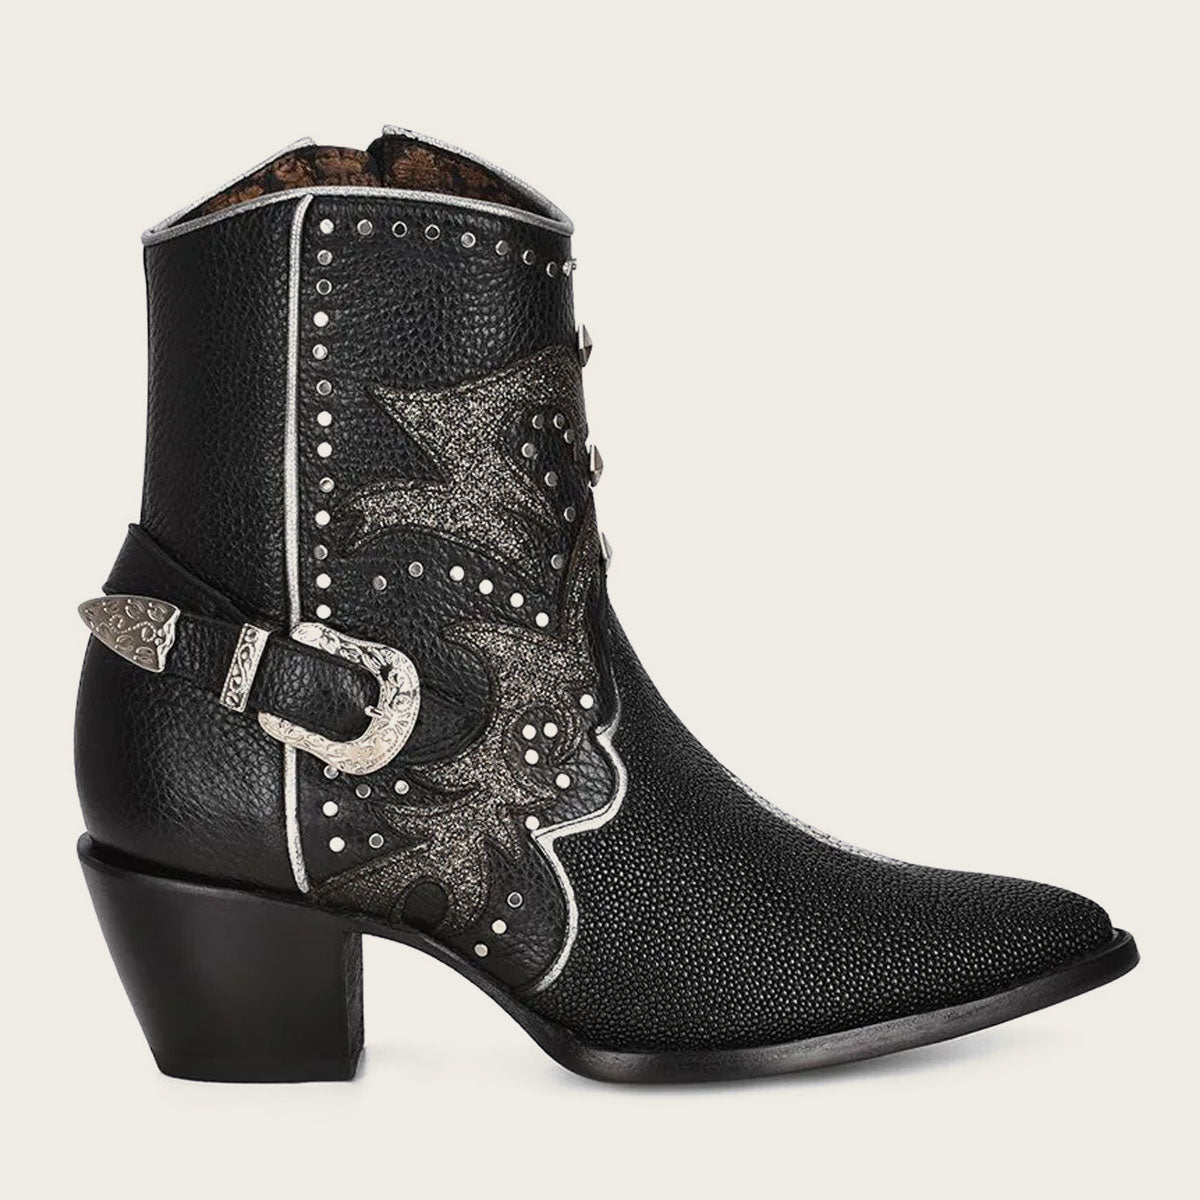 These boots are a true work of art, with intricate details that will leave you mesmerized.